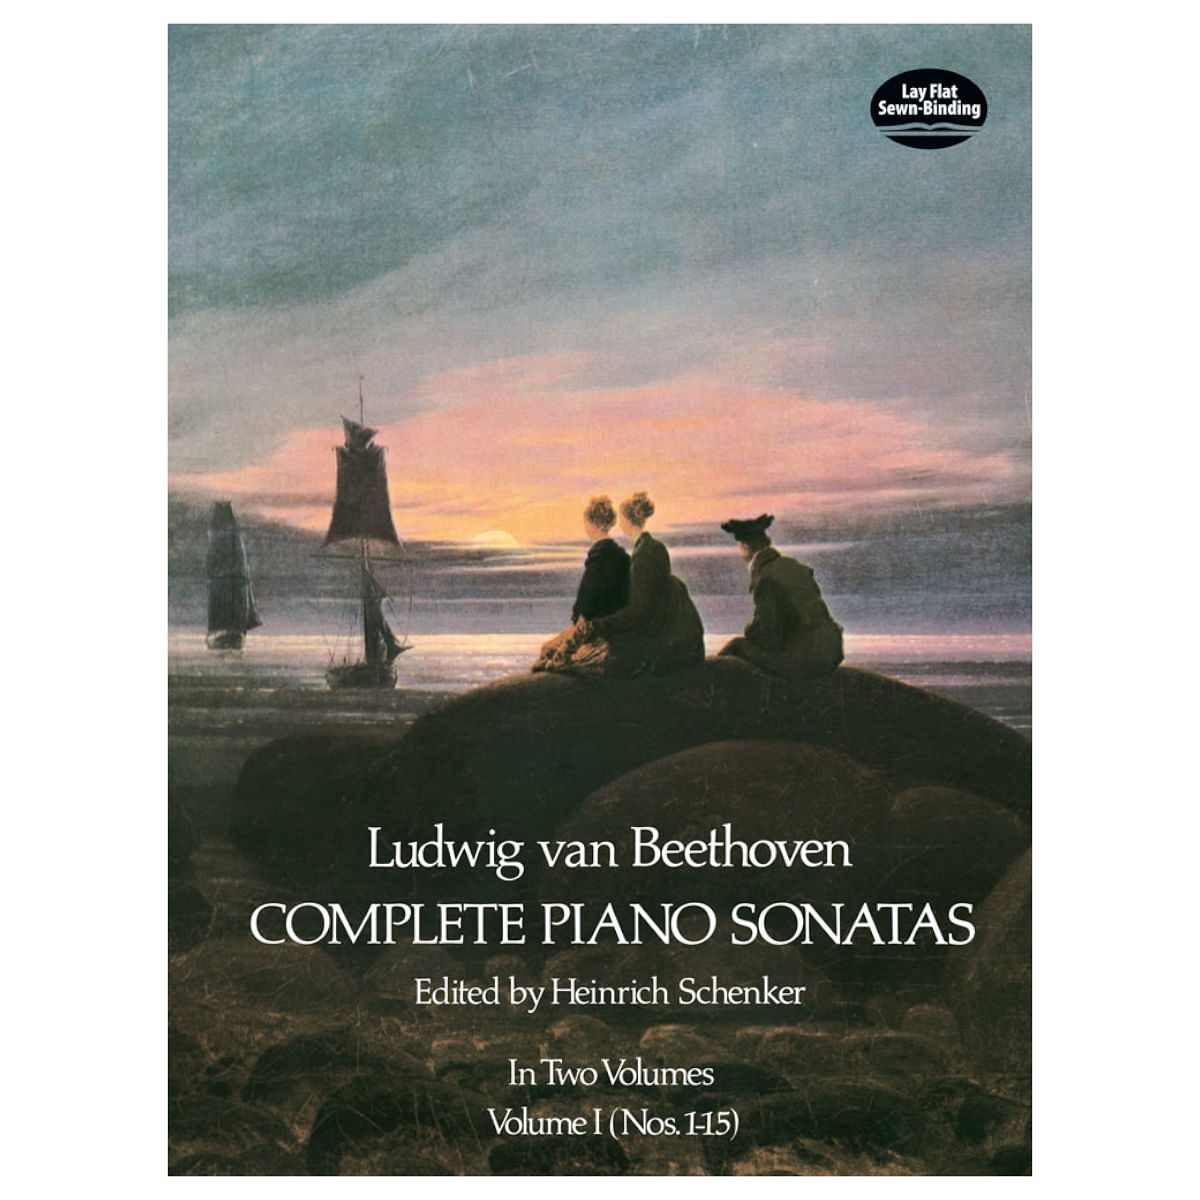 Best　Buy　Vol　V,　India　Books　Piano　Complete　Beethoven　Sonatas　Repertoire　Collections　in　L　Piano